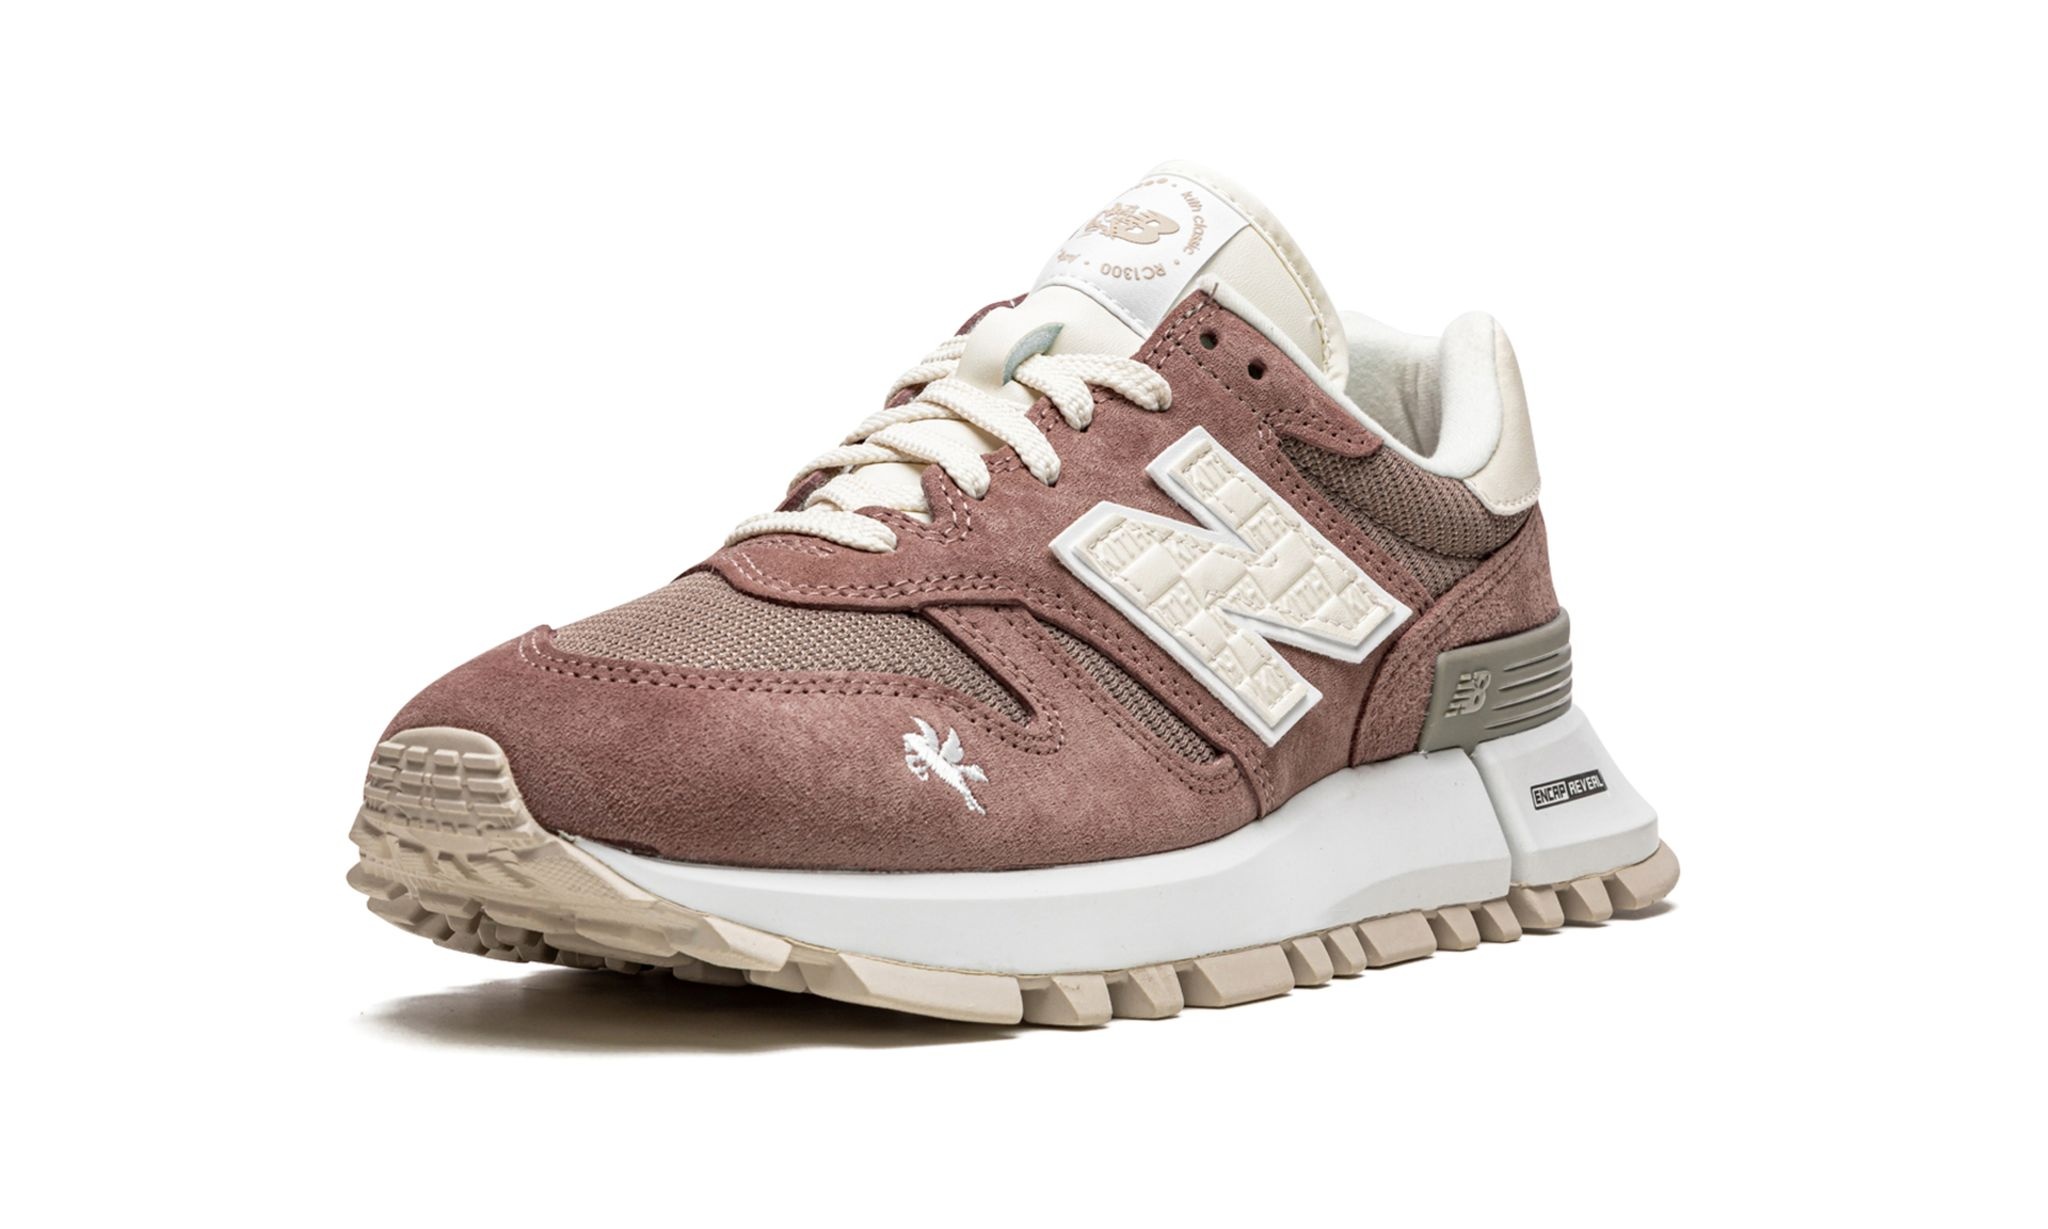 MS1300 "Kith - 10th Anniversary - Antler" - 4